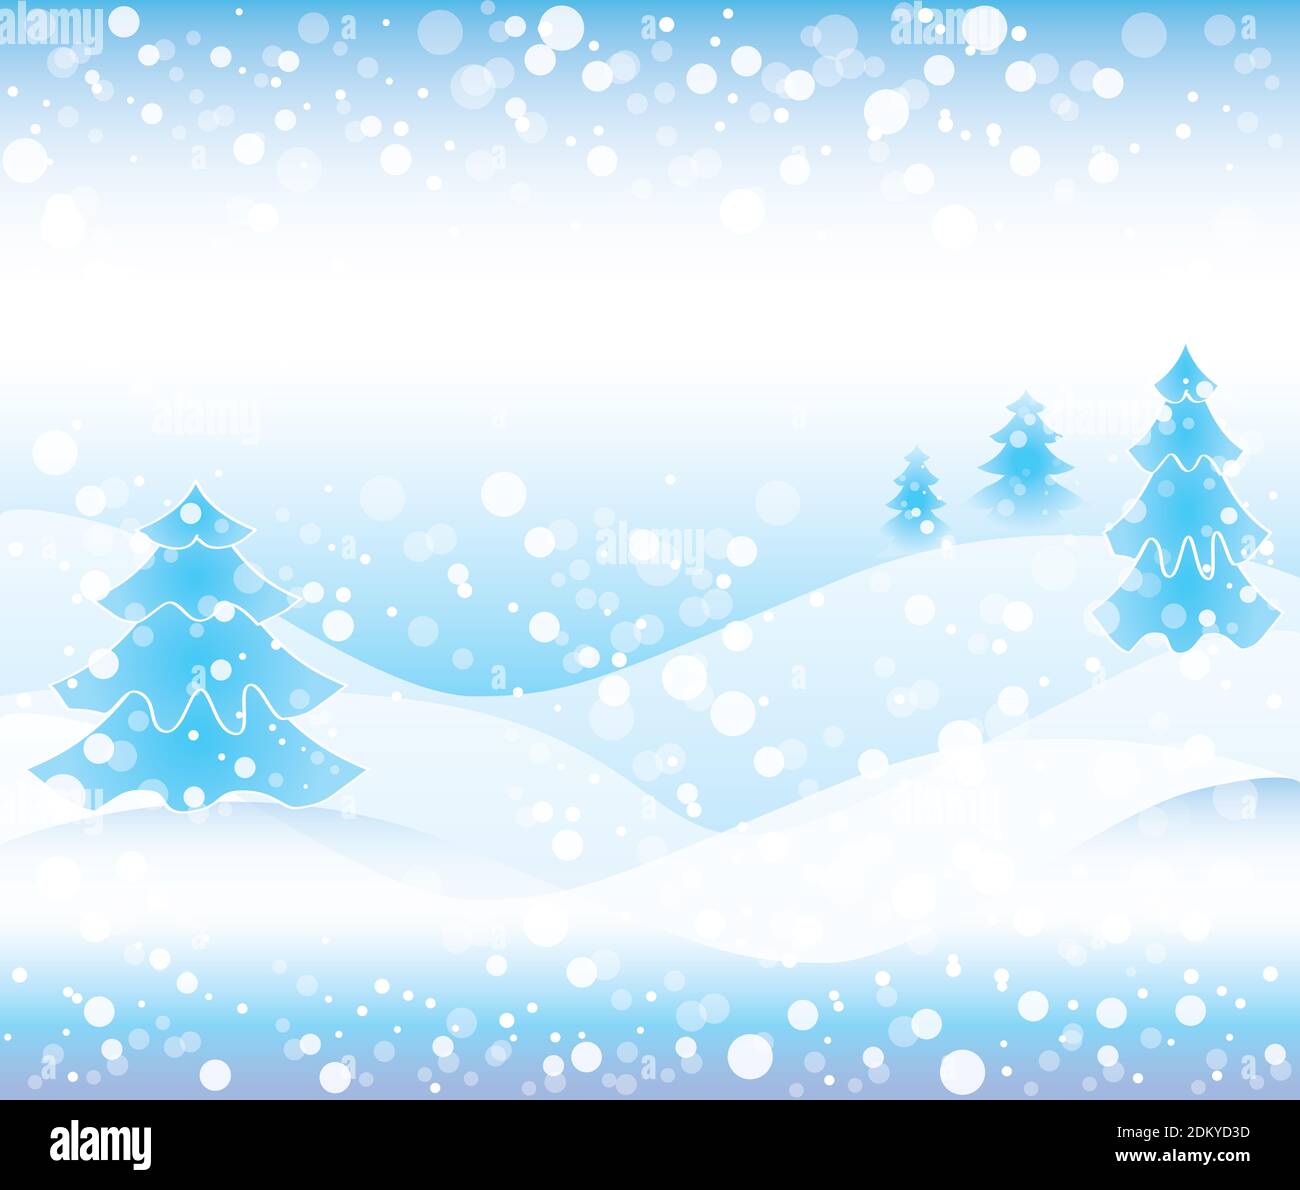 Winter Snowy In Hill Of Tree With Snowfall Background Design